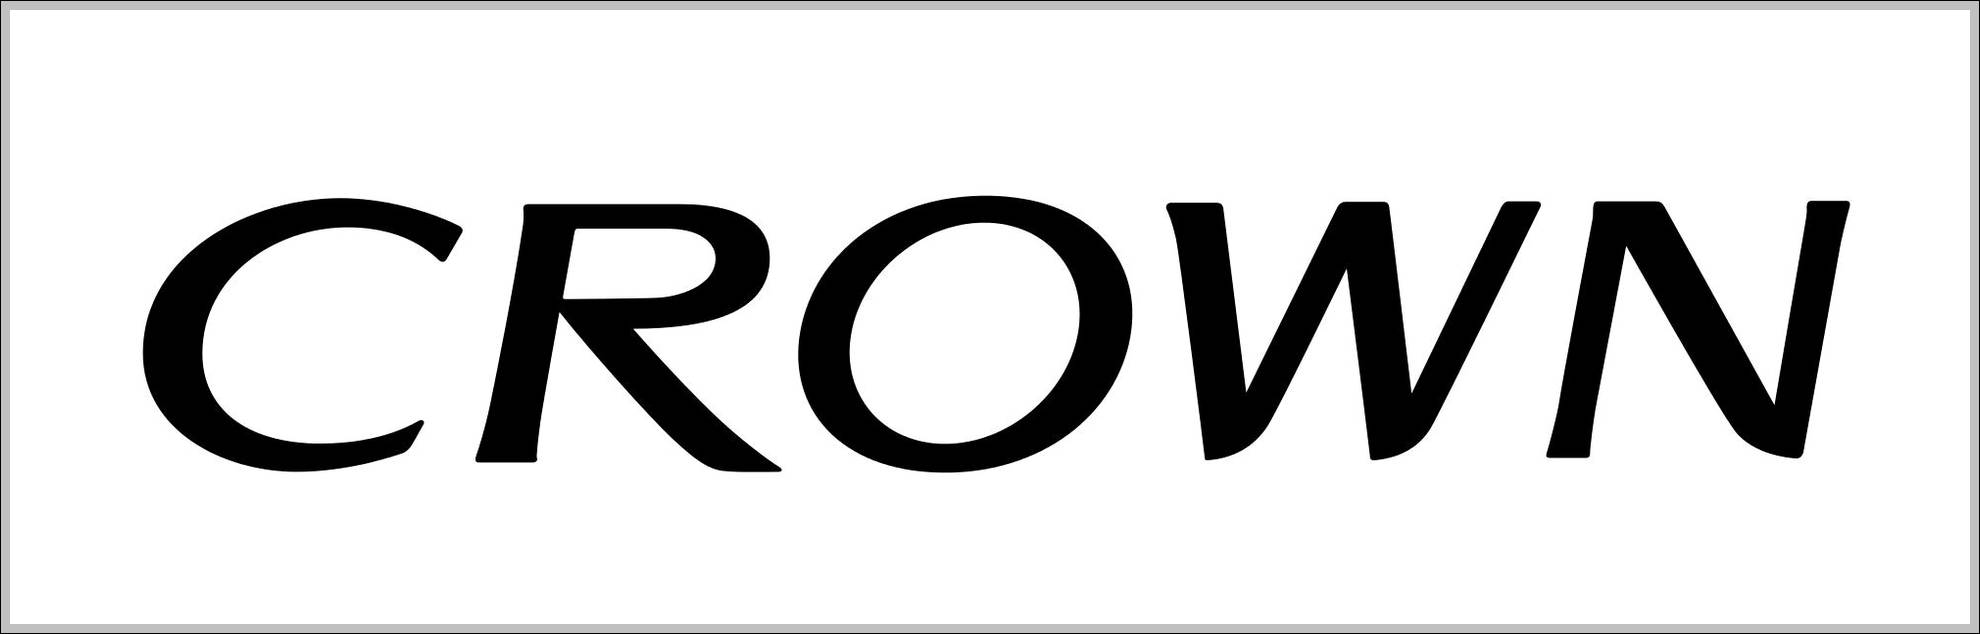 Toyota Crown sign